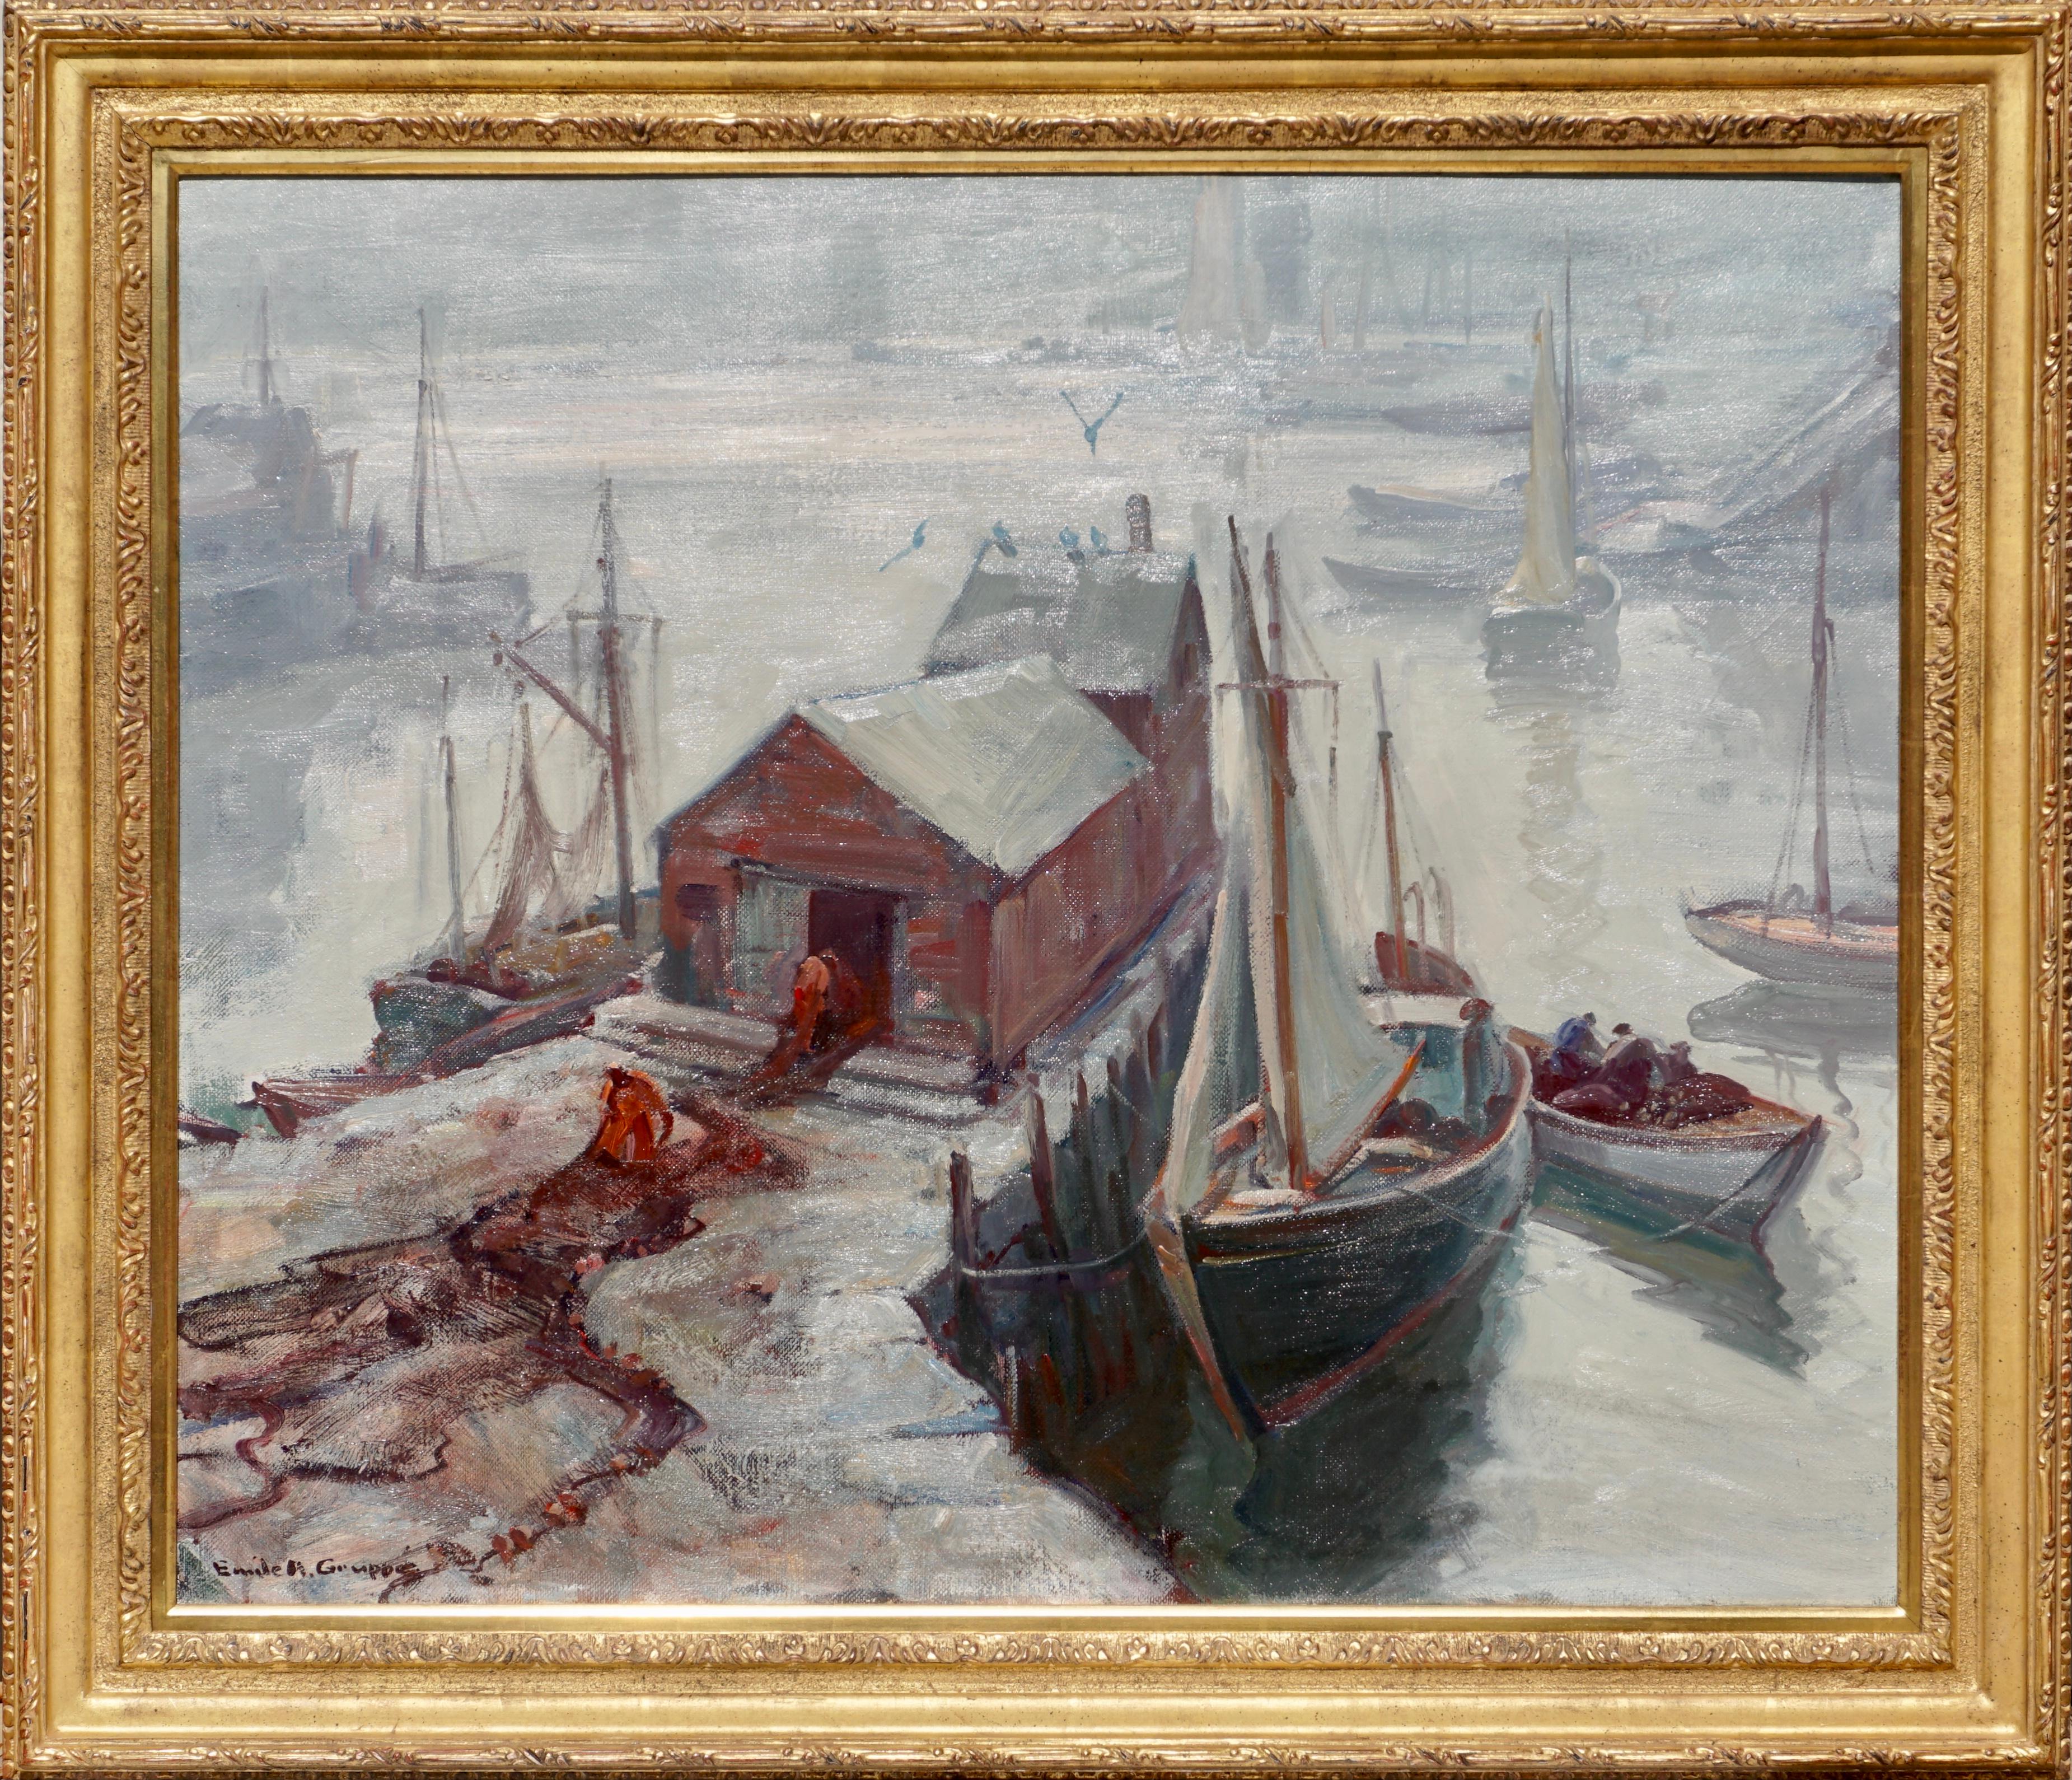 Emile Gruppe (American, 1896-1978) Motif #1, Rockport, Massachusetts. A cold , rainy and gray morning or evening in Rockport gethhing the nets in order to start the day of fishing and an honest days work.

Oil on canvas. Signed (lower left) and